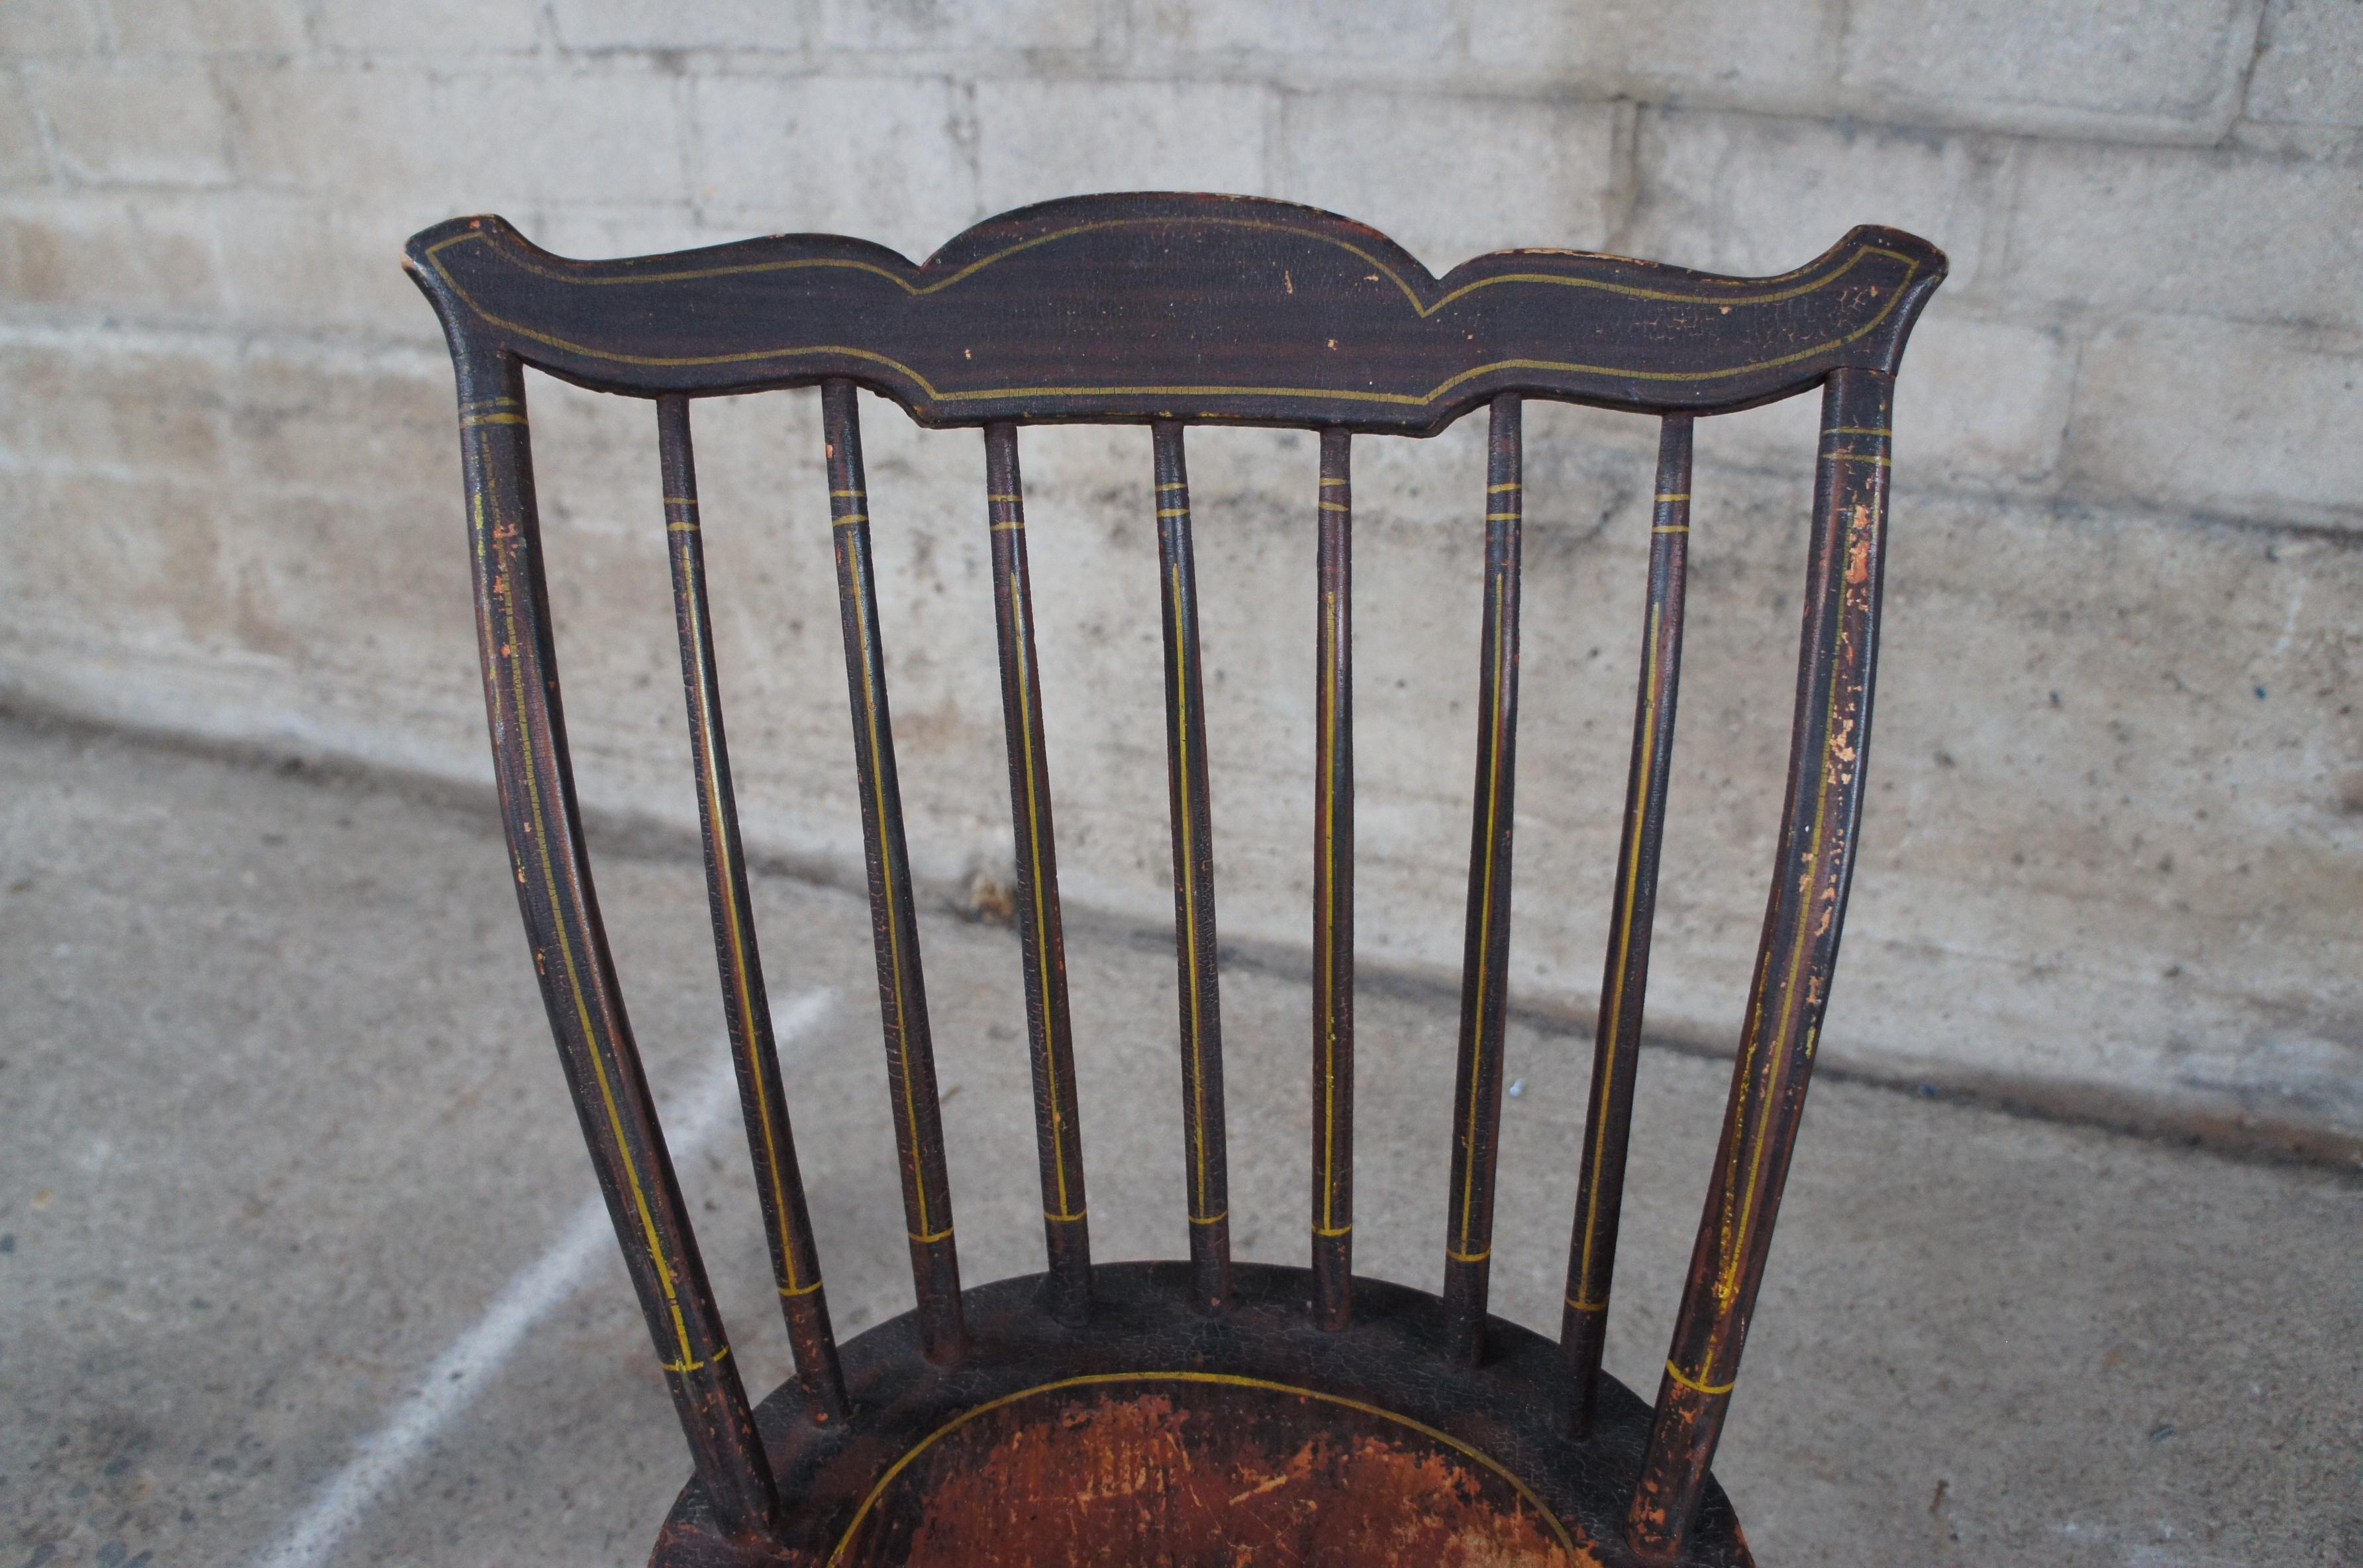 Hardwood Antique Early American Painted Windsor Spindle Back Step Down Chair Farmhouse